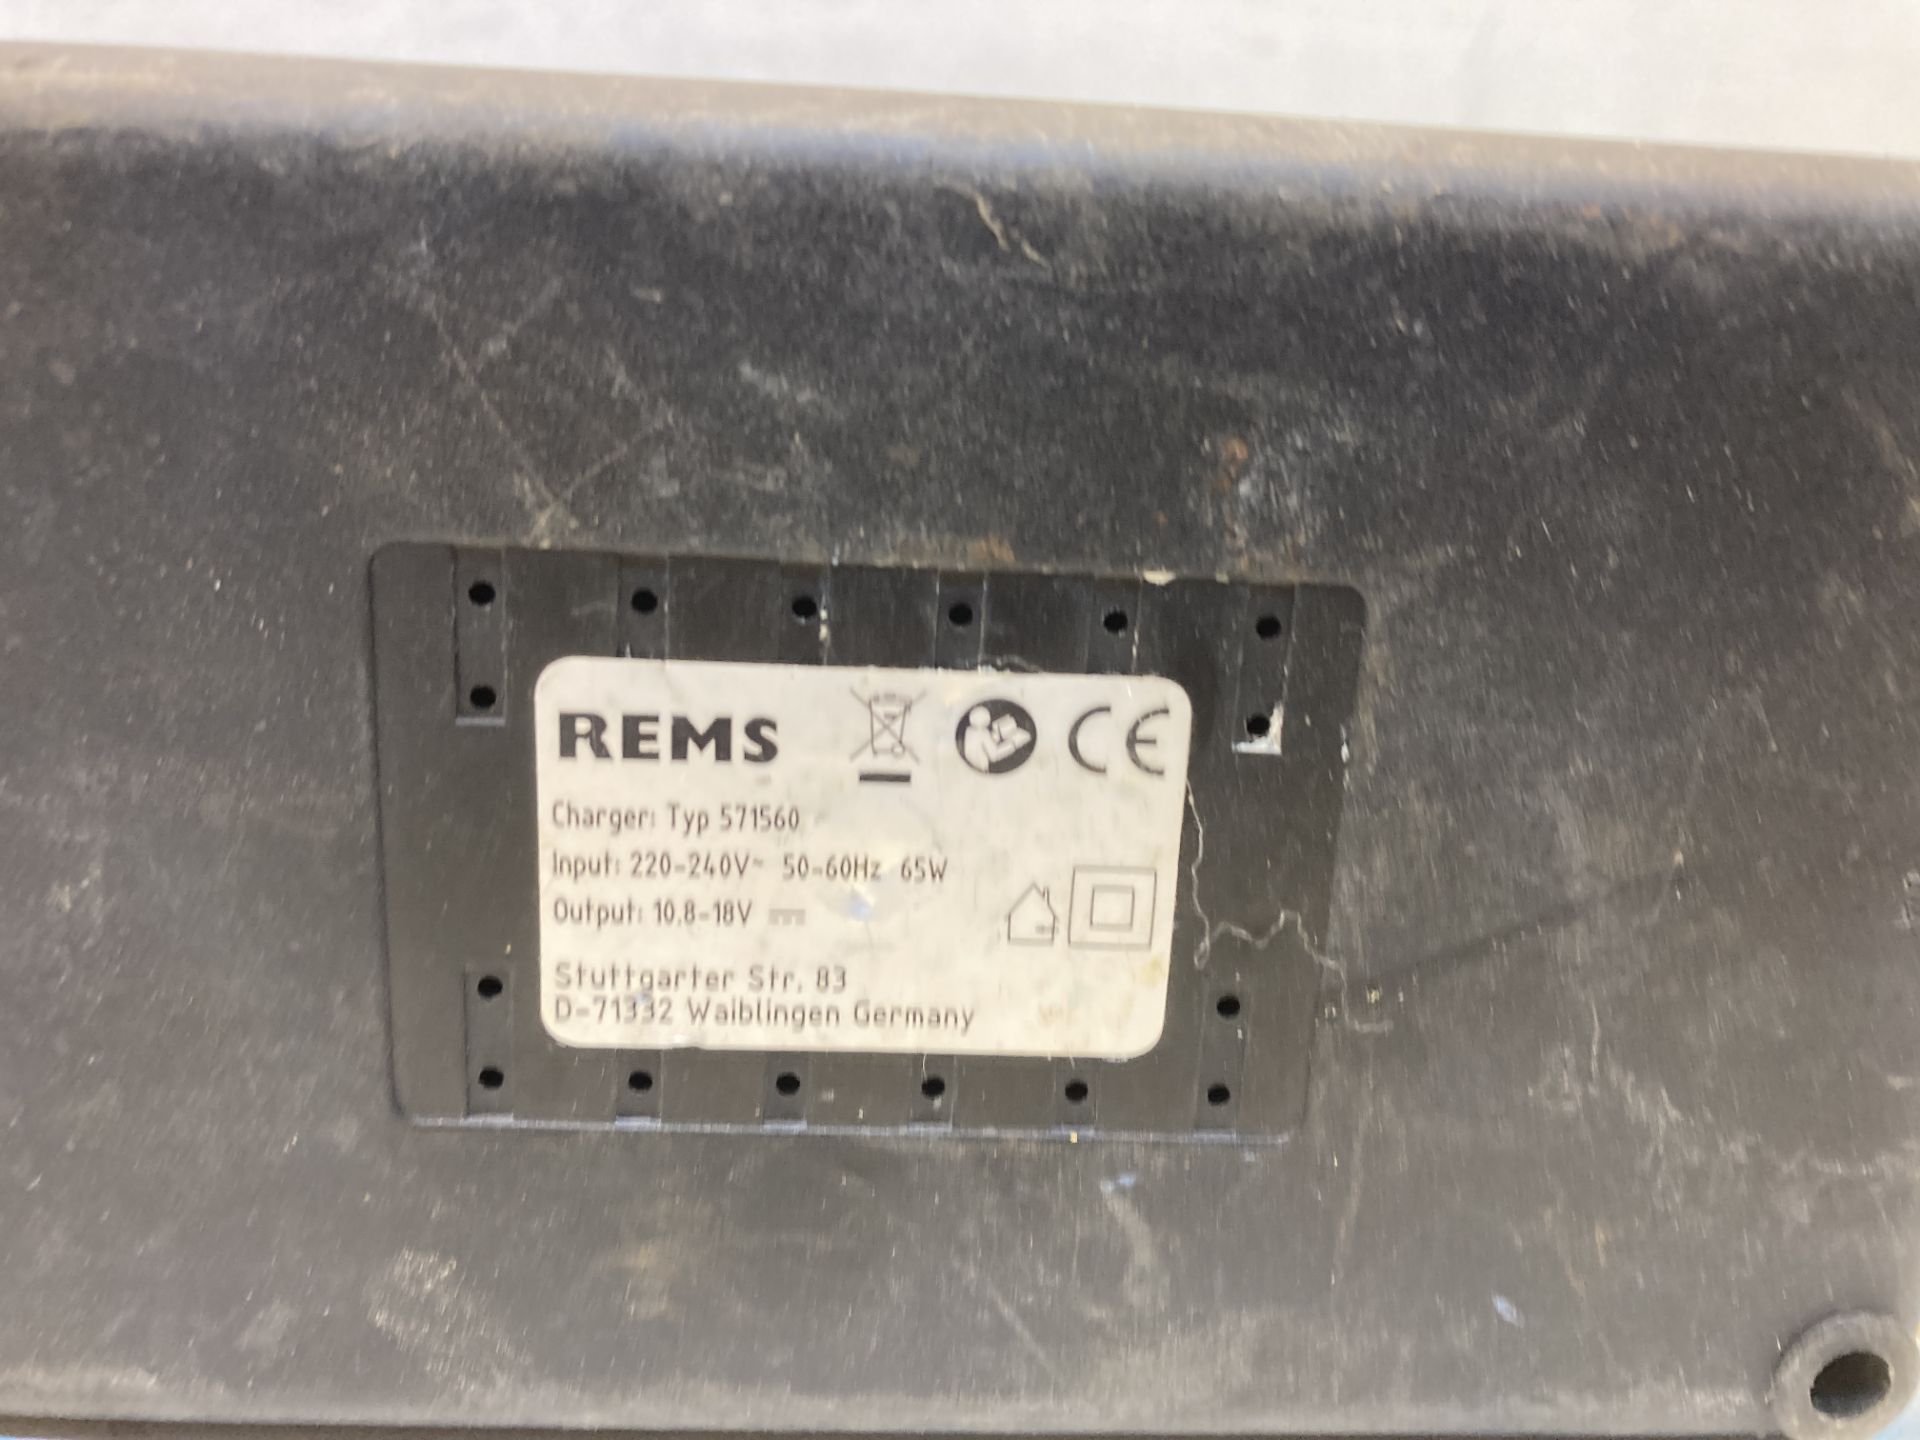 2 x REMS Li-Ion Battery Charger | Type 571560 - Image 4 of 4